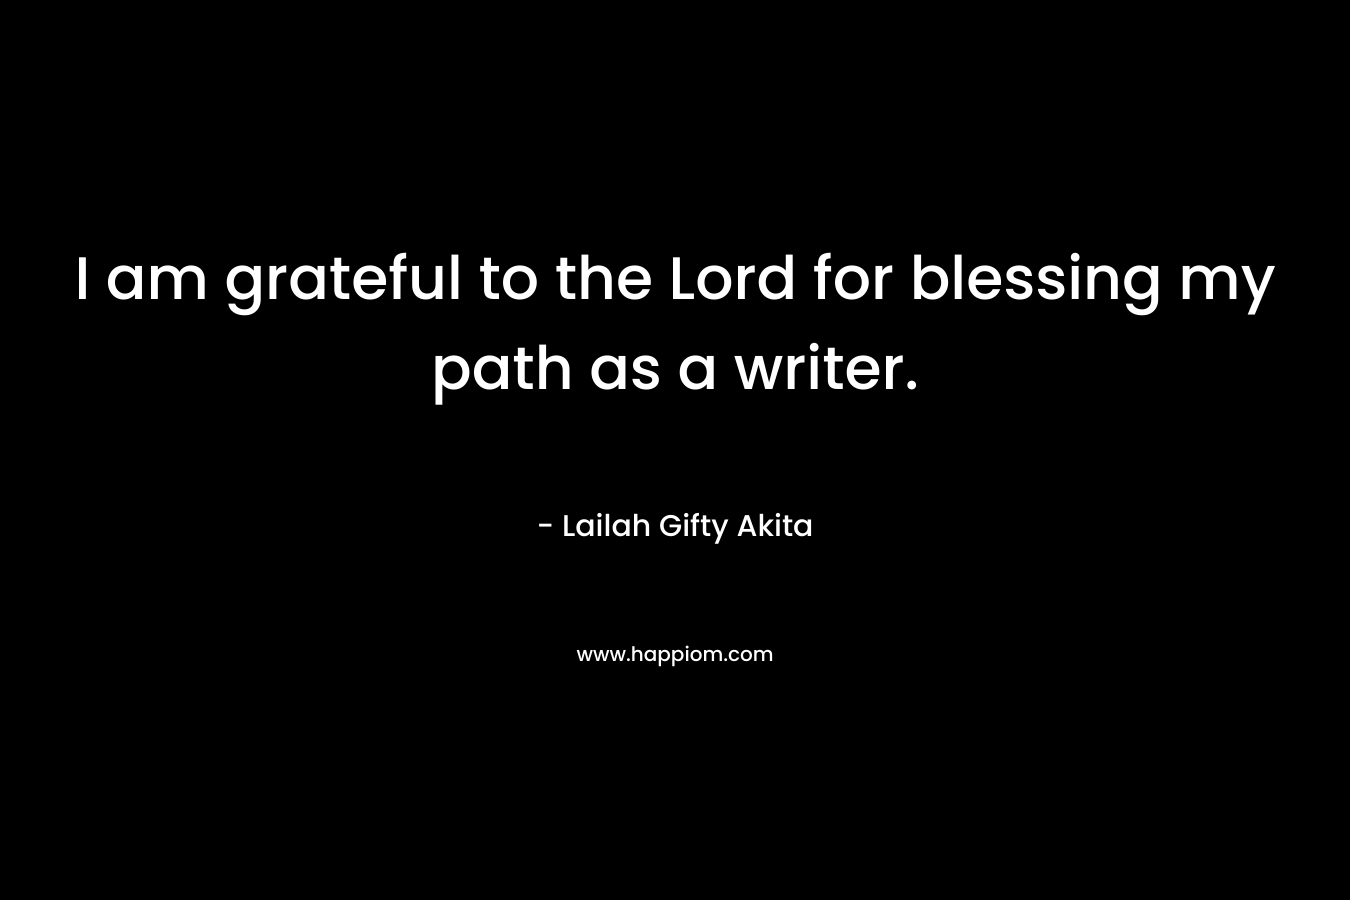 I am grateful to the Lord for blessing my path as a writer.